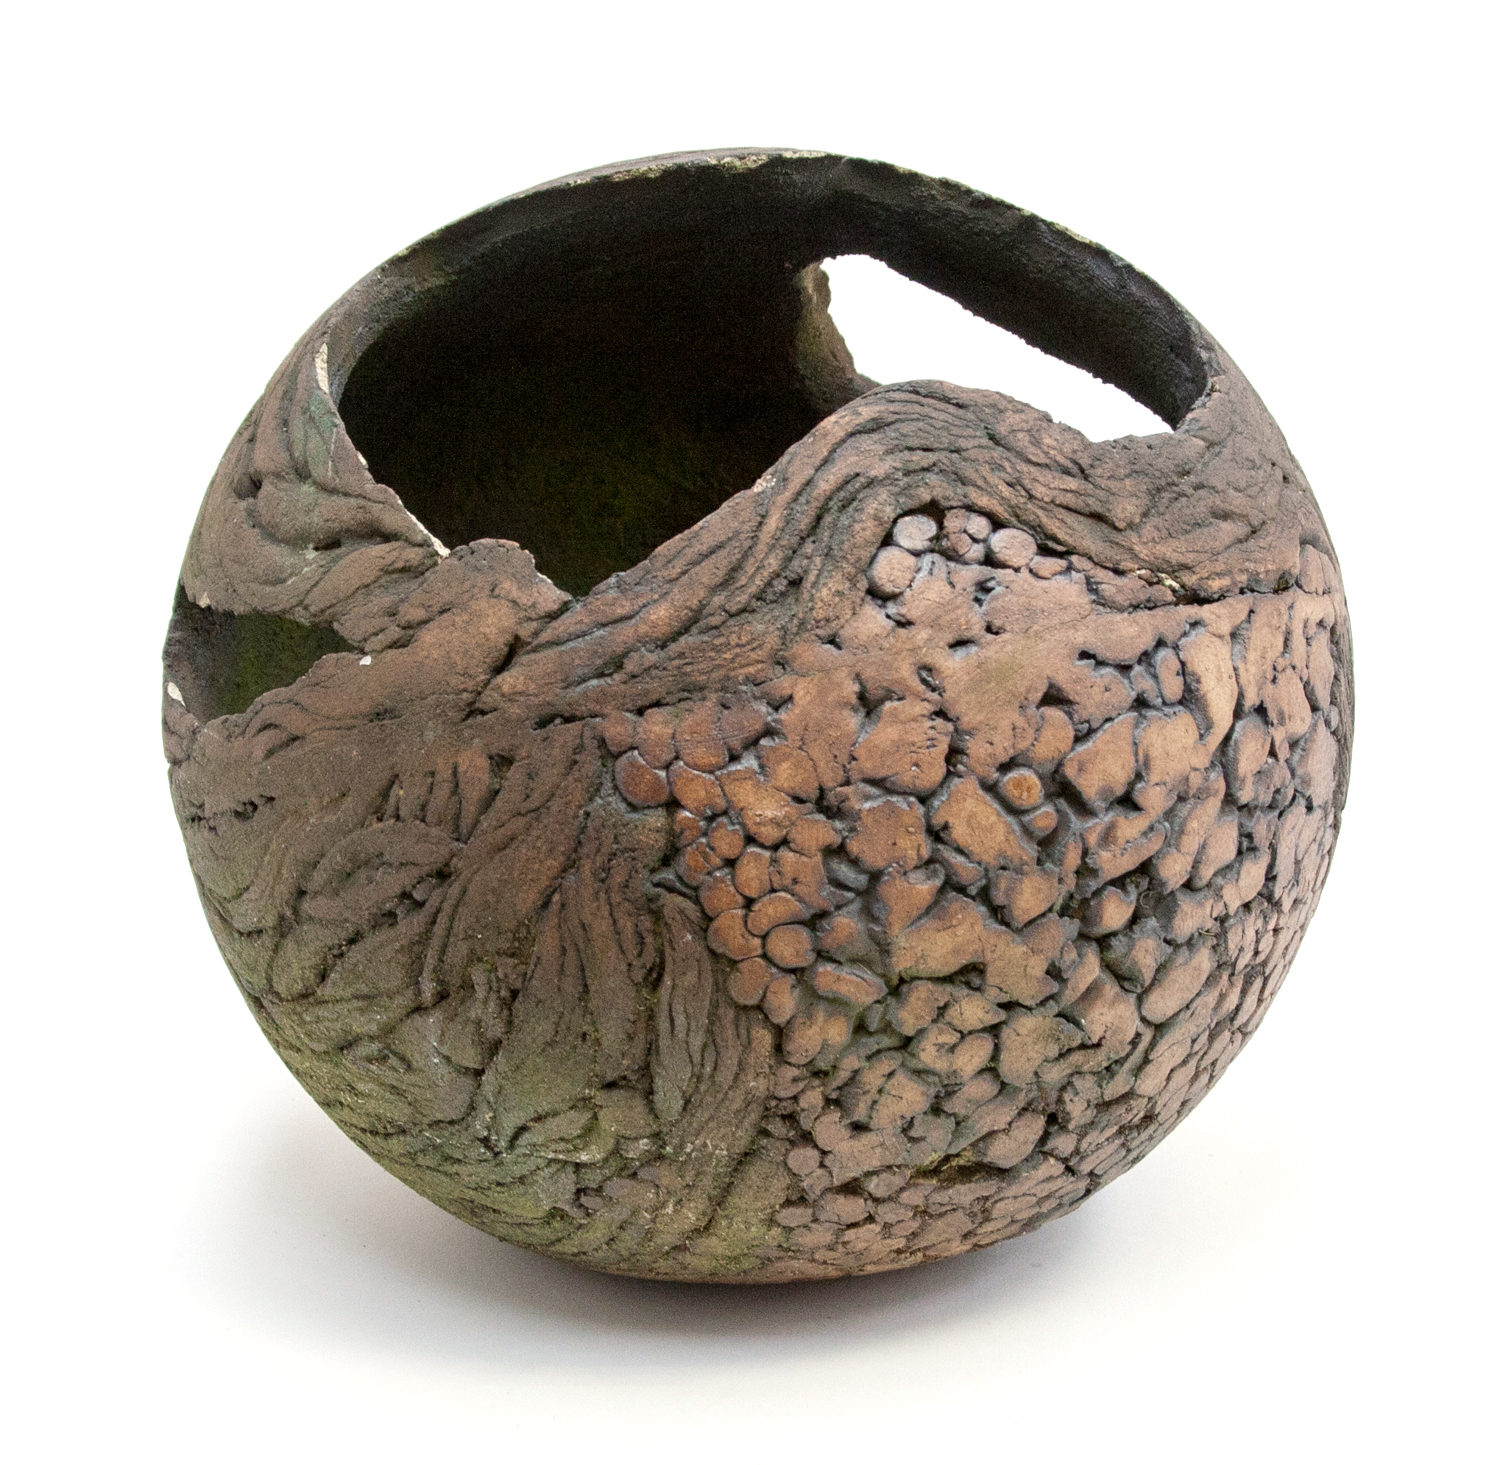 A 1970s ceramic garden planter of spherical form, weathered, textured surface, with pierced